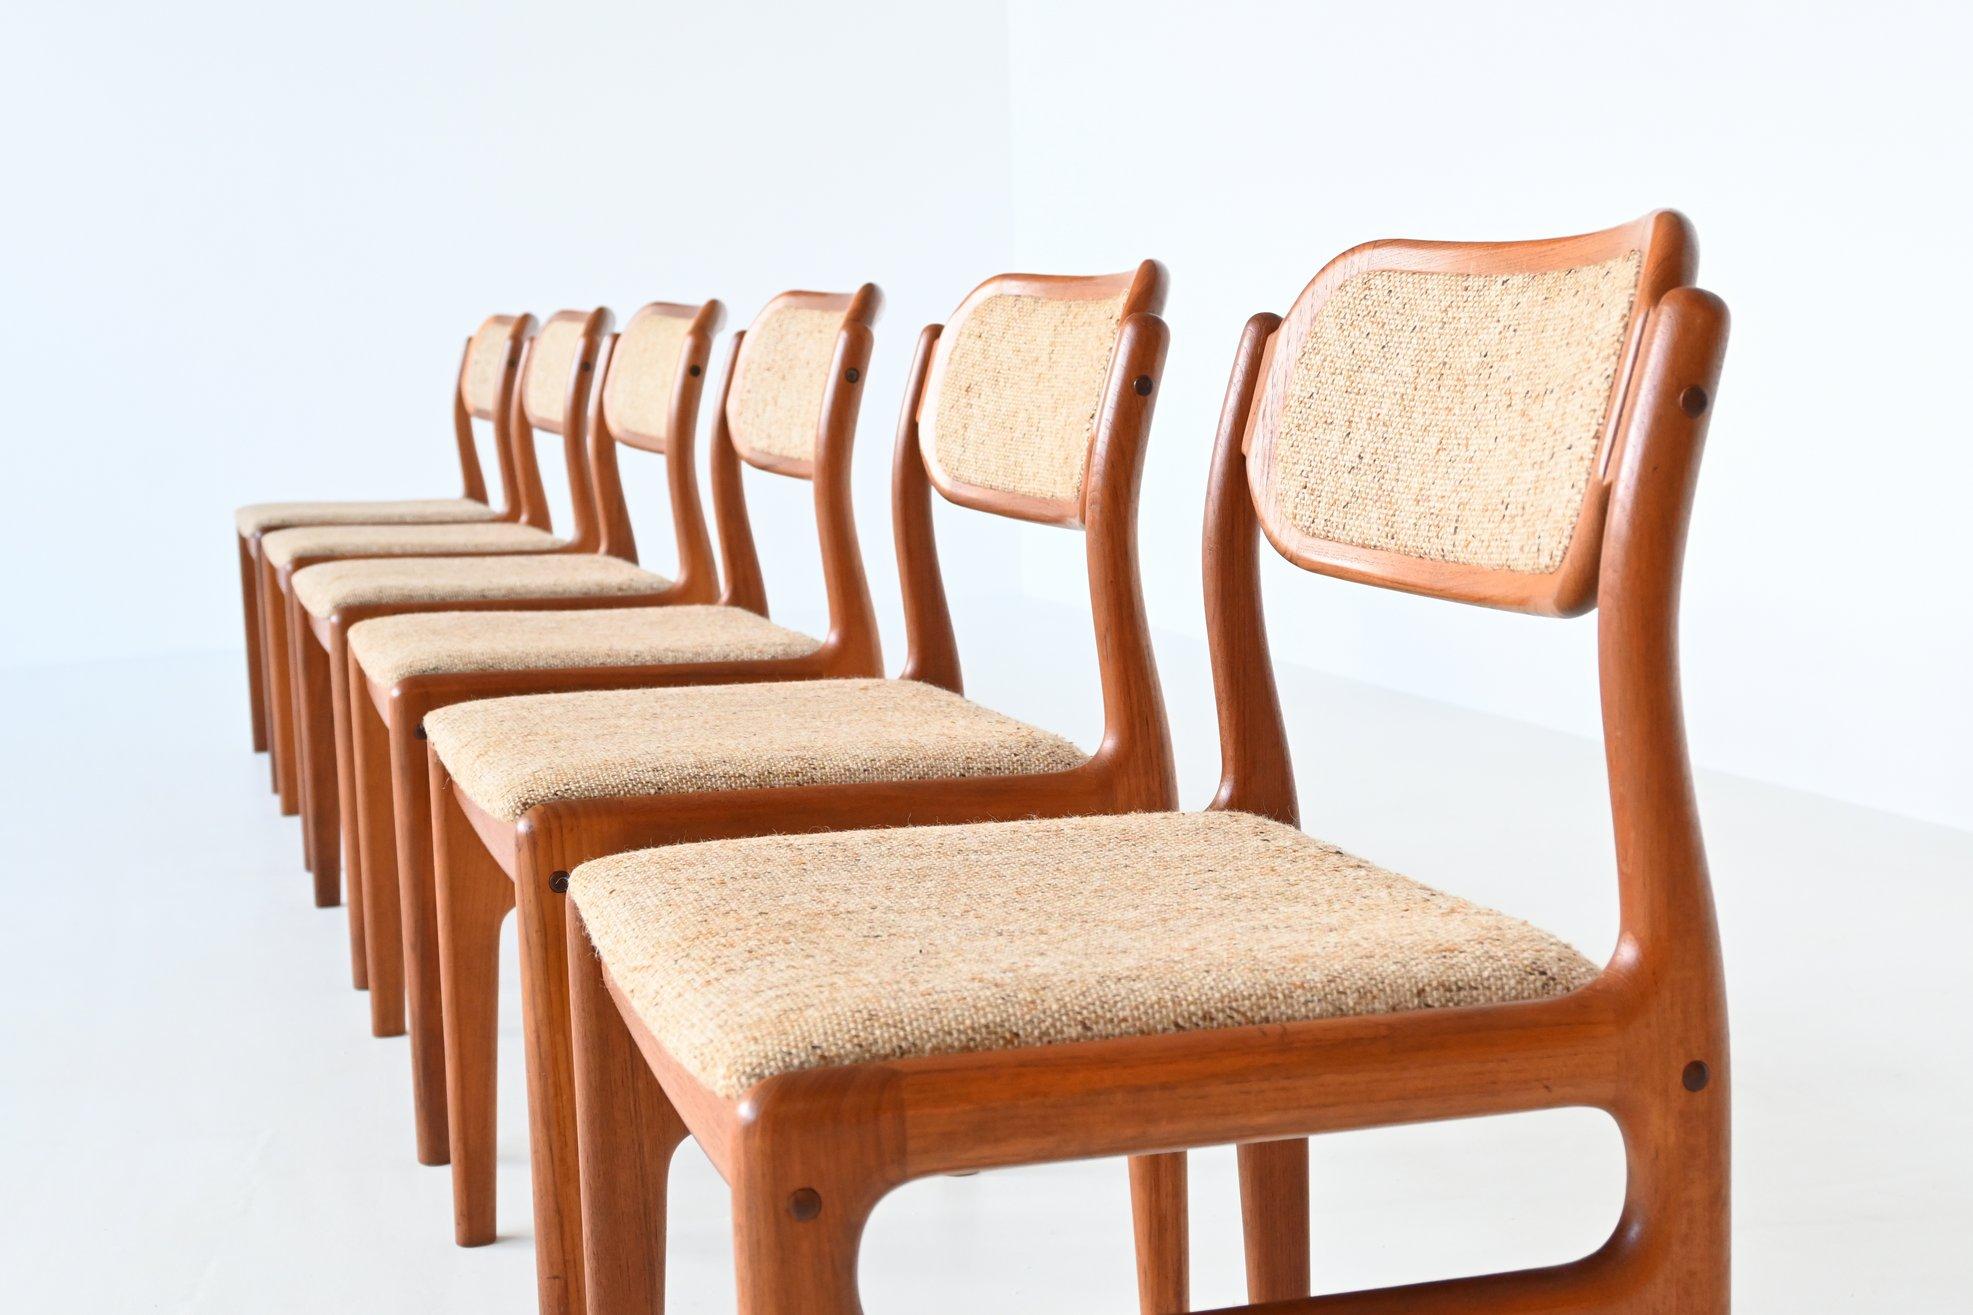 Very nice set of six dining chairs designed by Johannes Andersen and manufactured by Uldum Møbelfabrik, Denmark 1960. They are made of solid teak wood and the seats are upholstered with beige brown fabric. These beautiful shaped chairs are in very